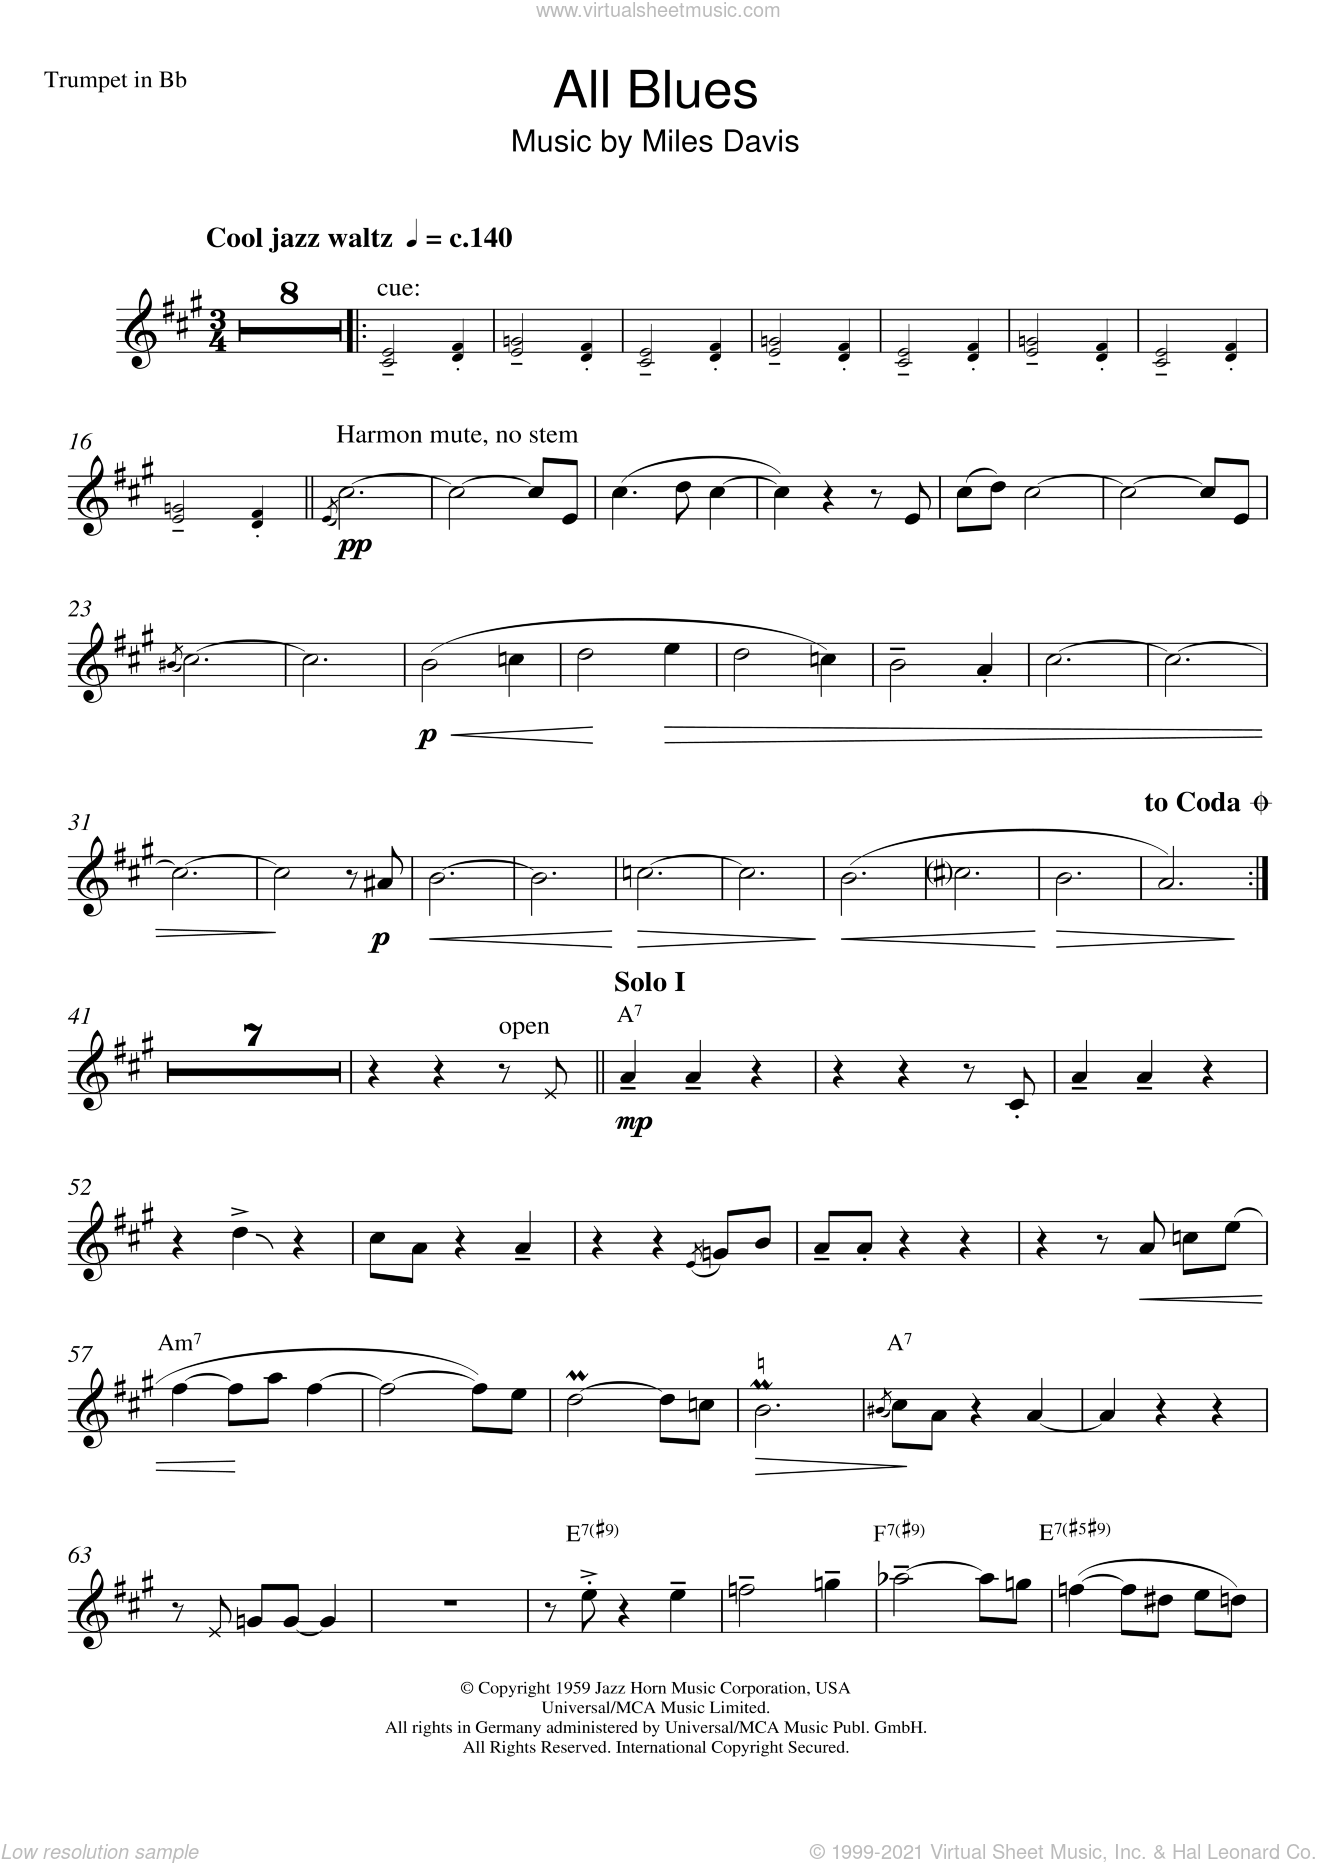 Free sheet music preview of All Blues for trumpet solo by Miles Davis.